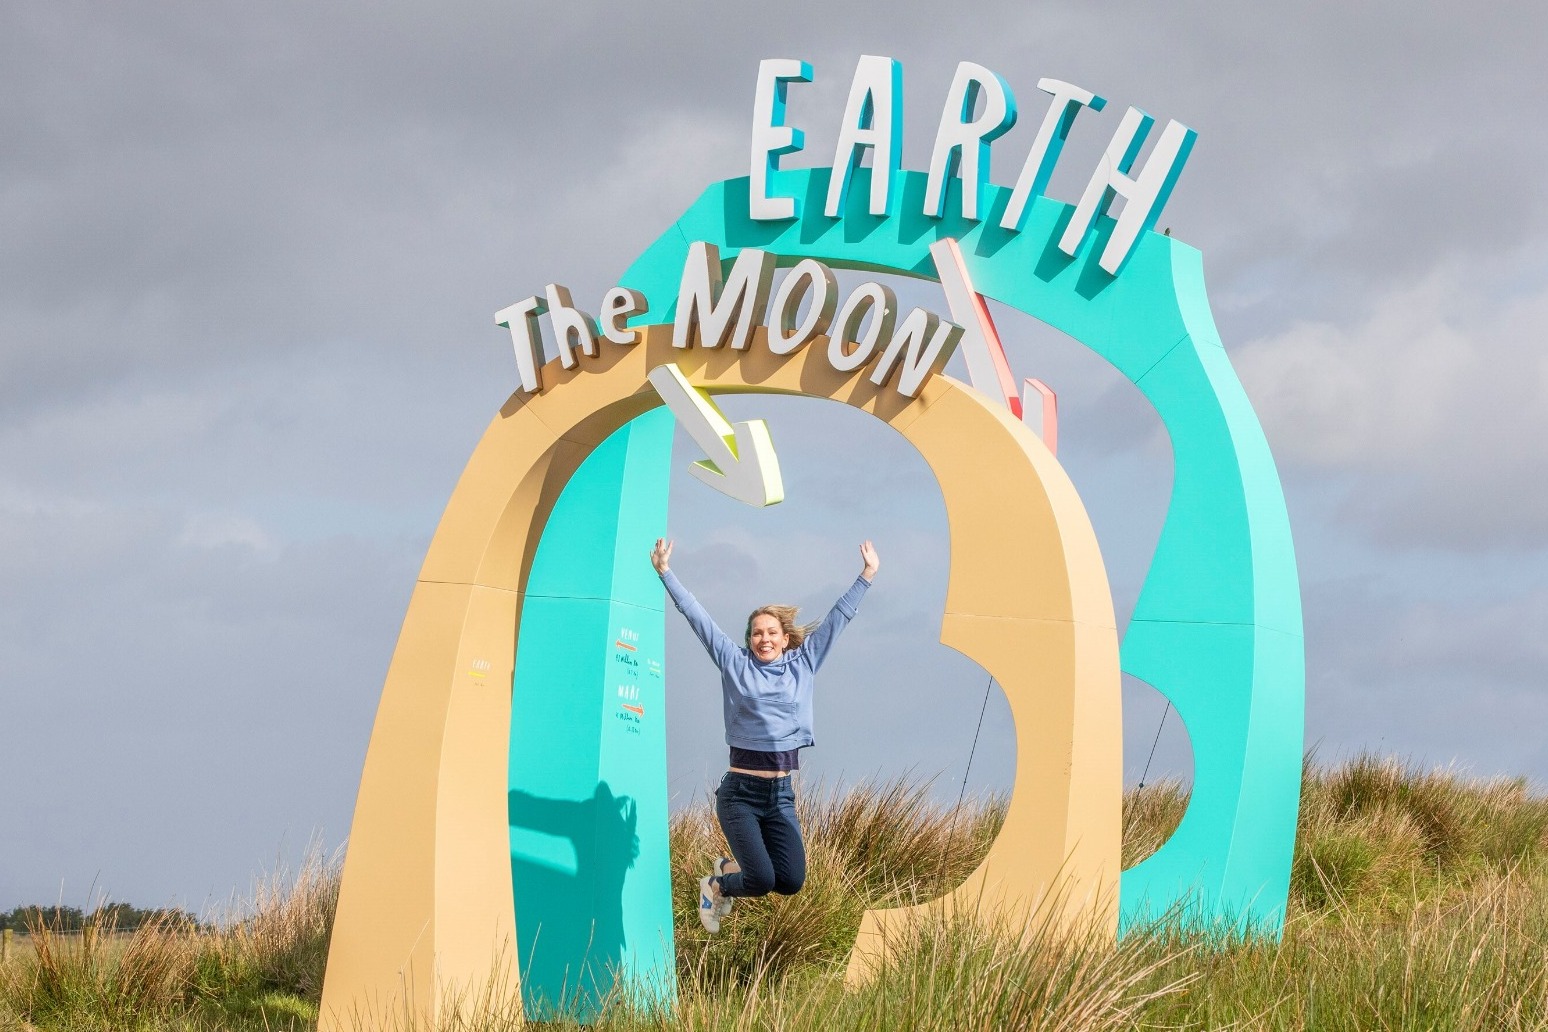 Scale model of solar system installed in Belfast hills 